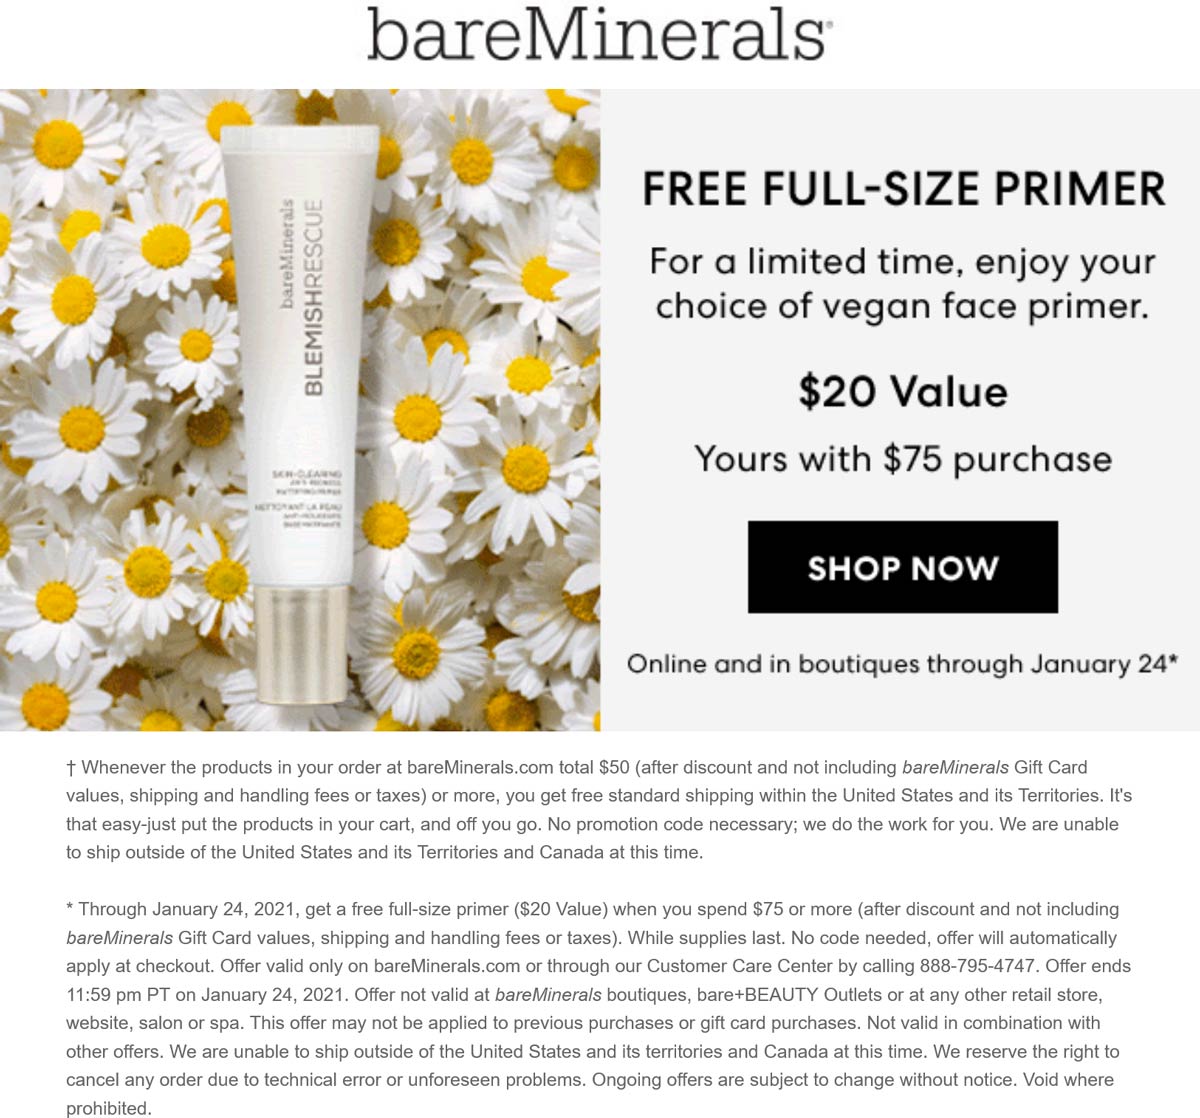 bareMinerals stores Coupon  Free full size primer with $75 spent at bareMinerals, ditto online #bareminerals 